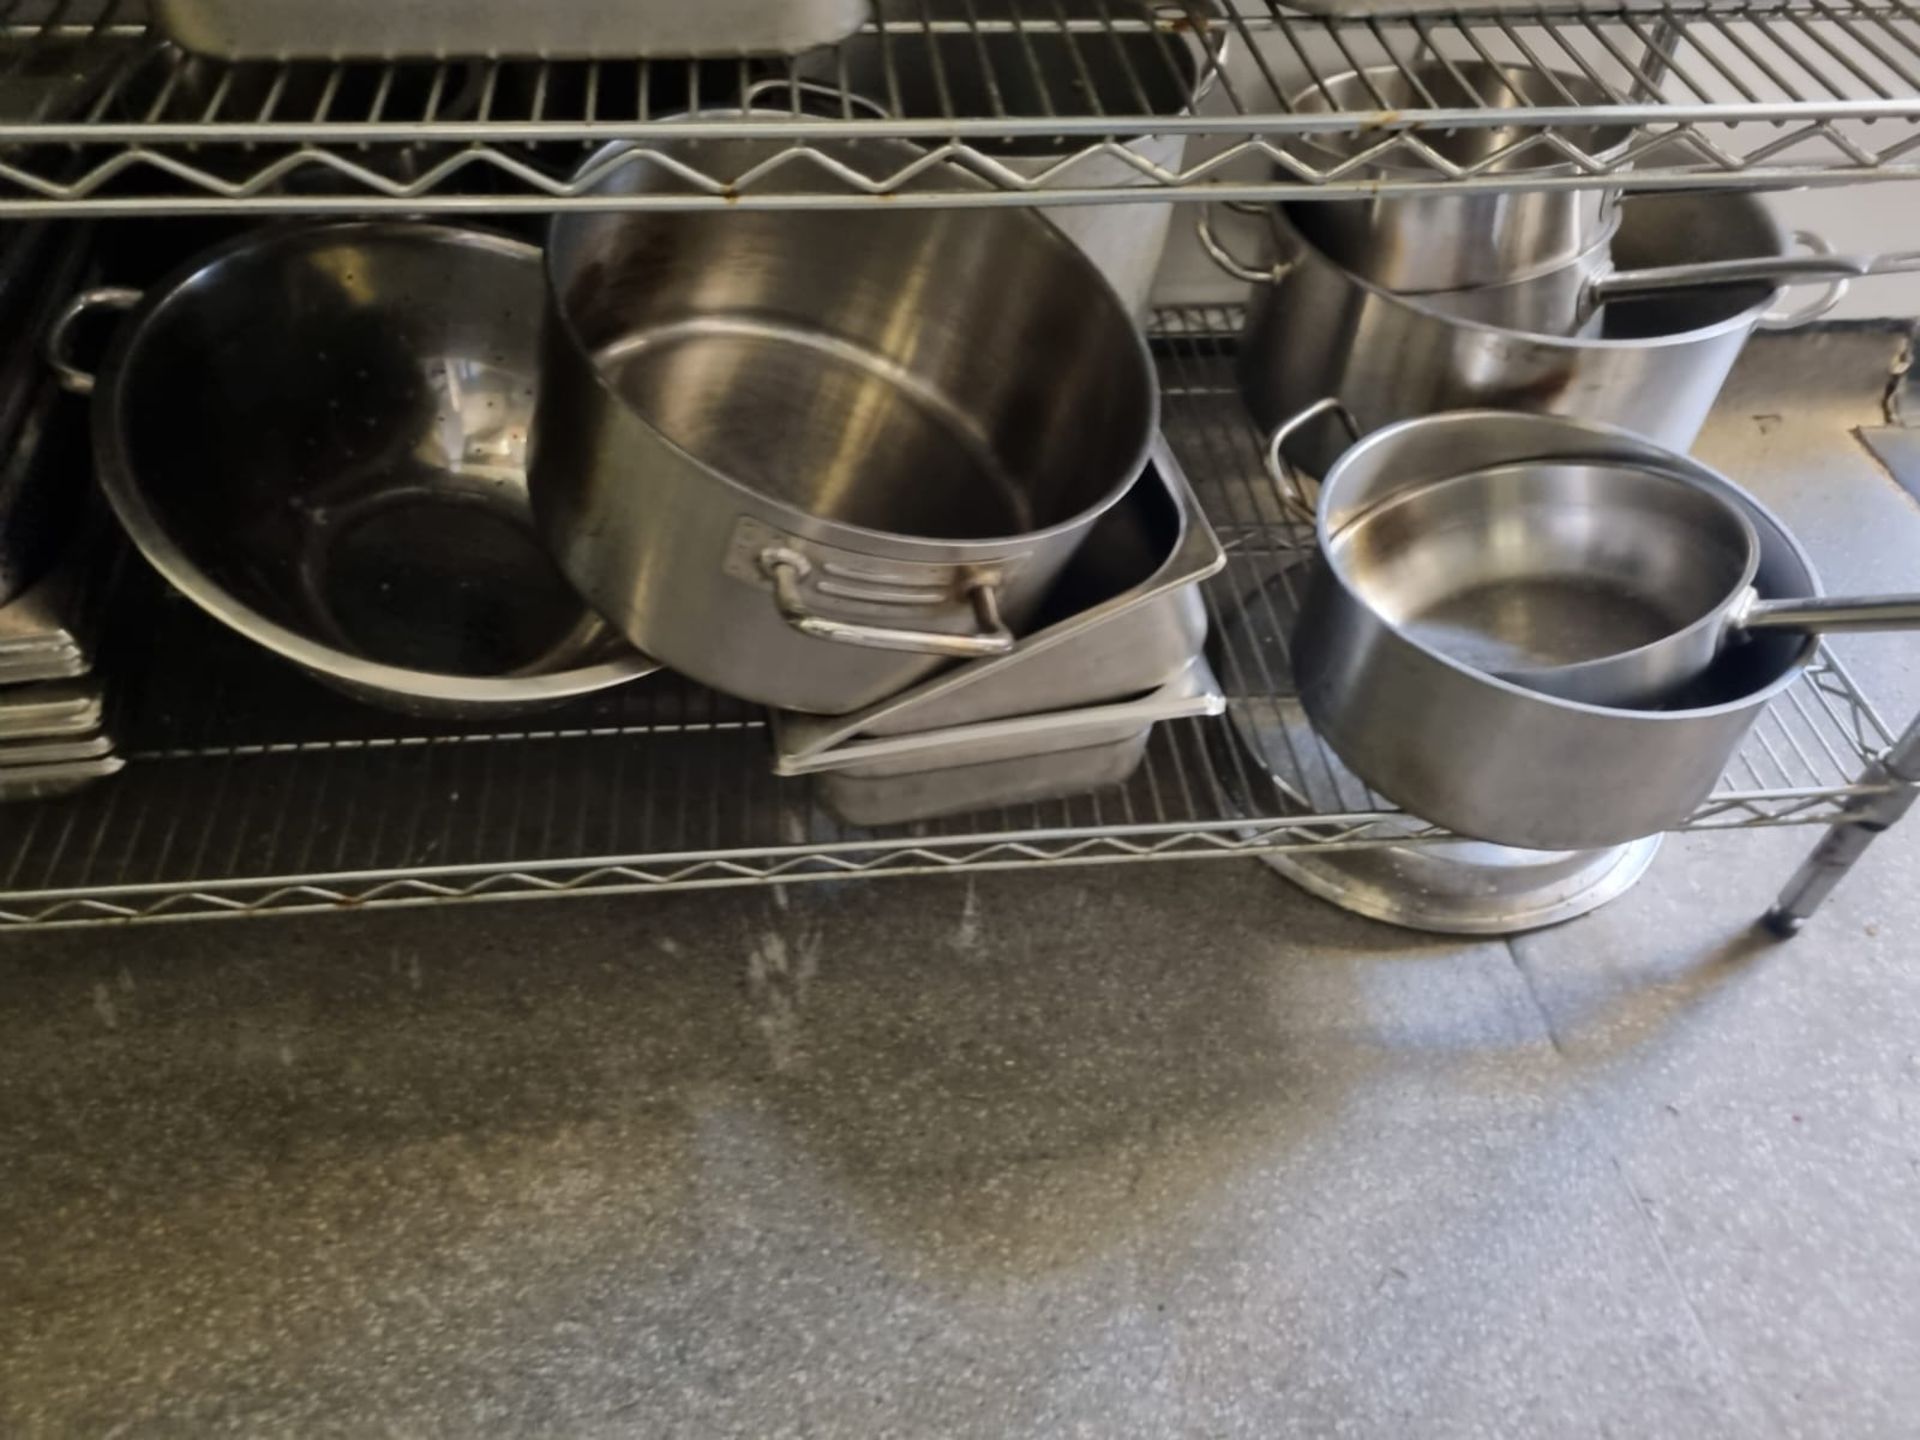 OEM- Various suacepans, stock pots and fry pans as photographed ( Main Kitchen ) - Image 4 of 4